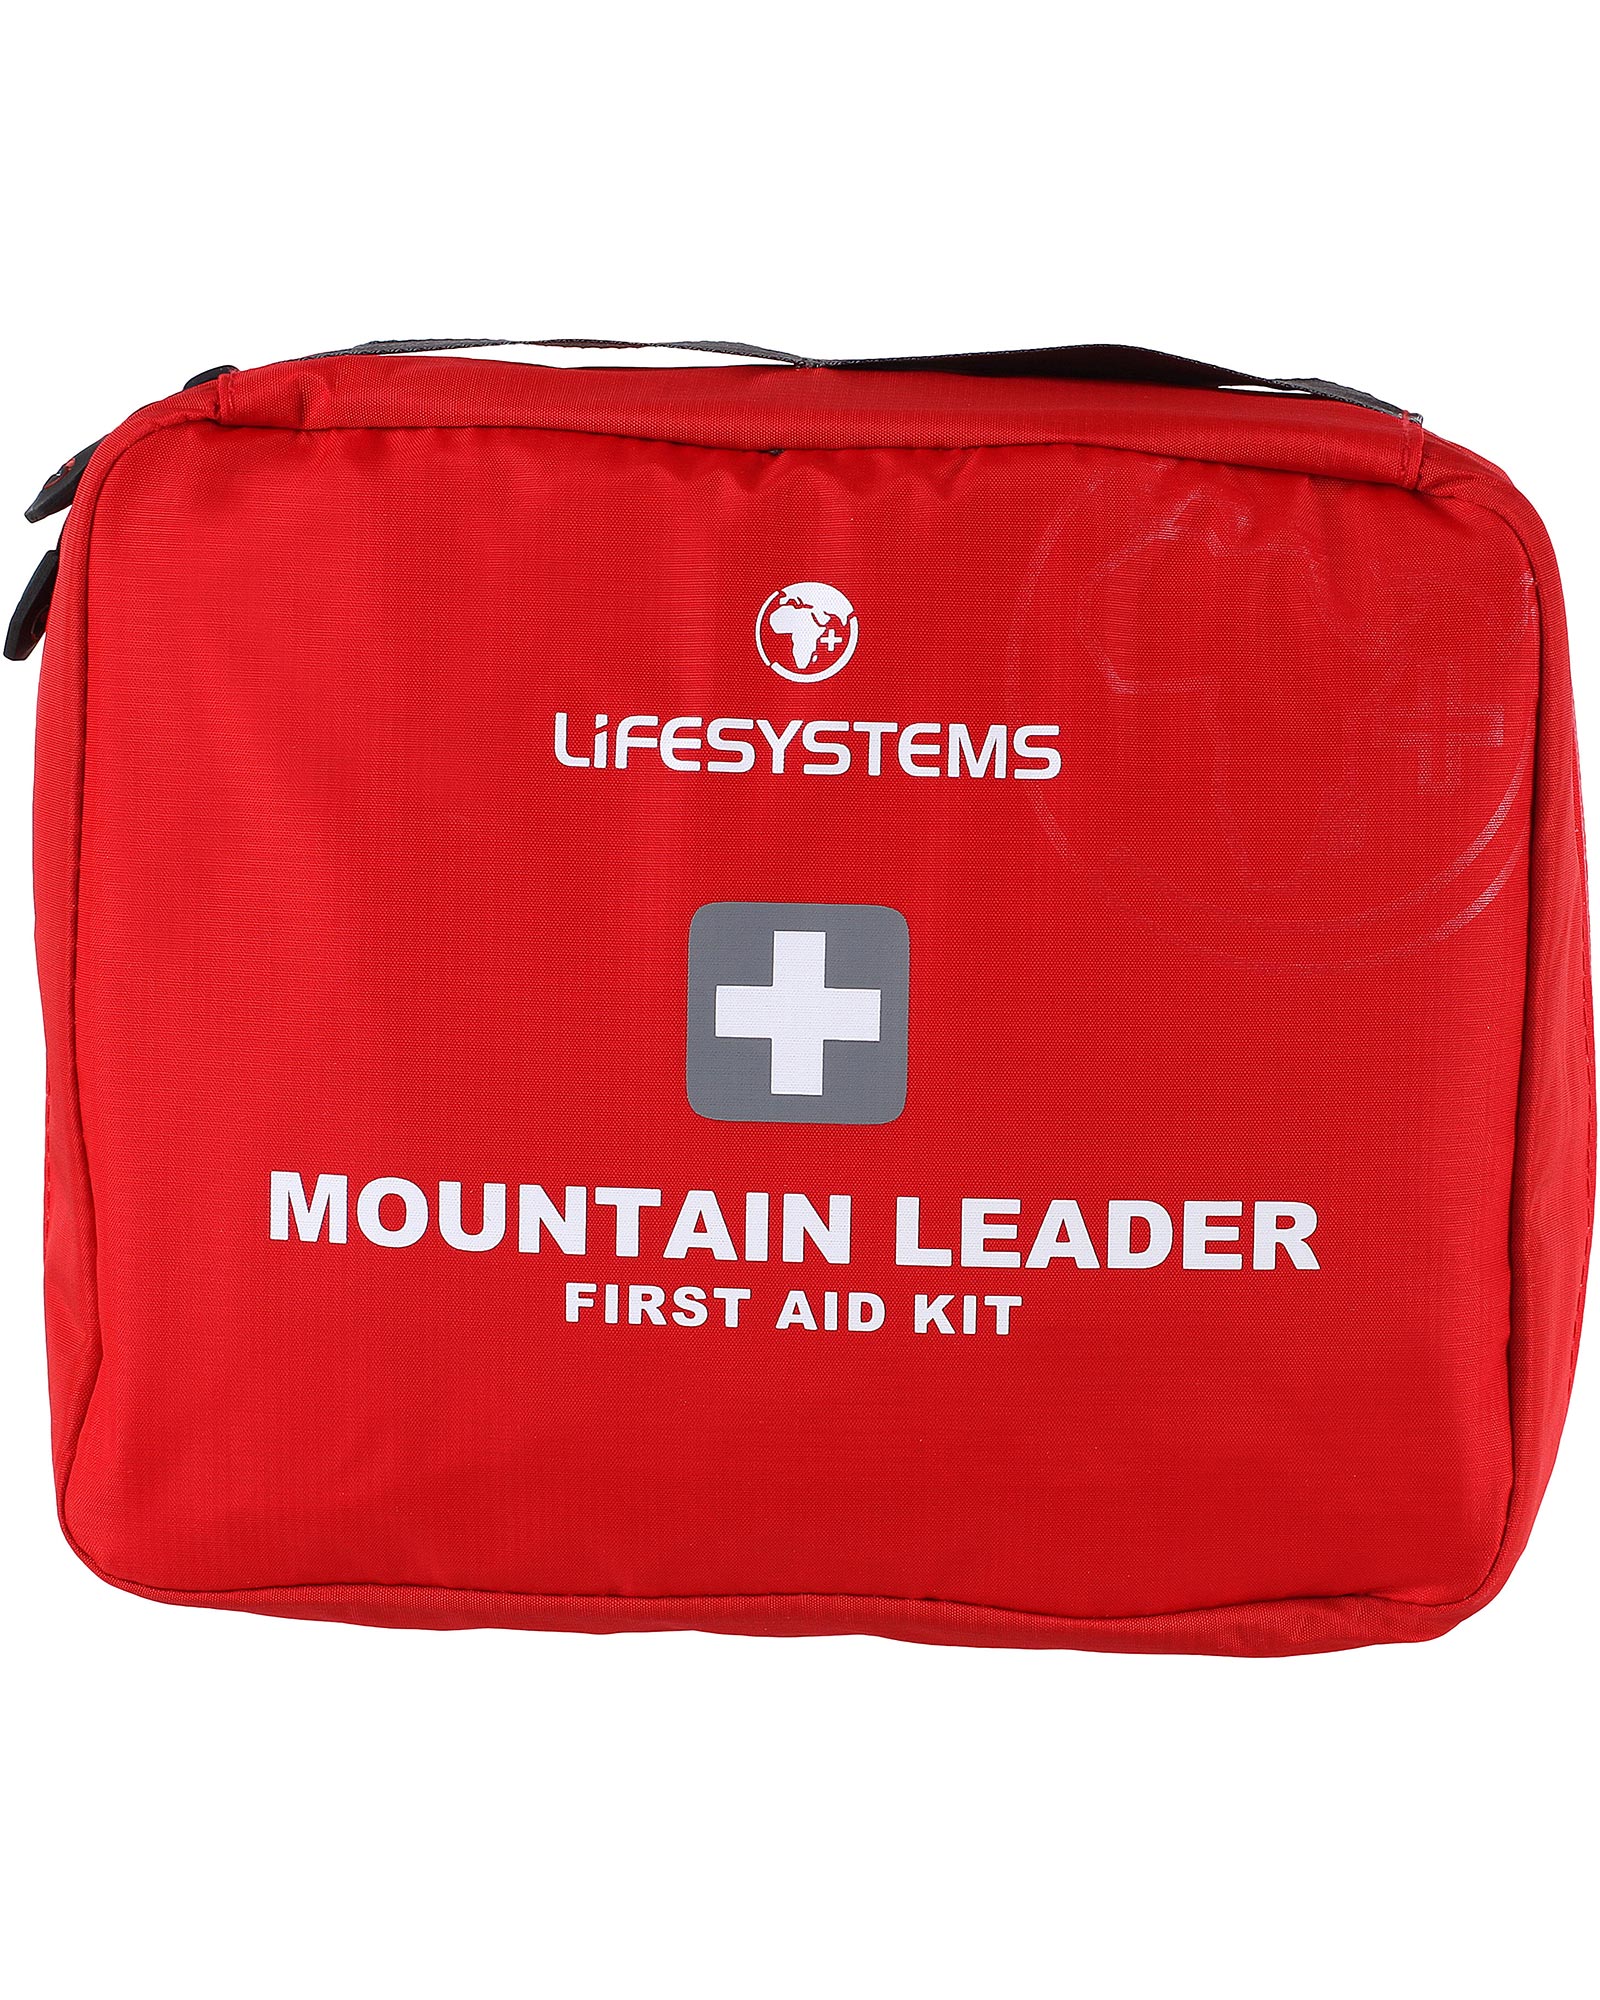 Product image of Lifesystems Mountain Leader First Aid Kit